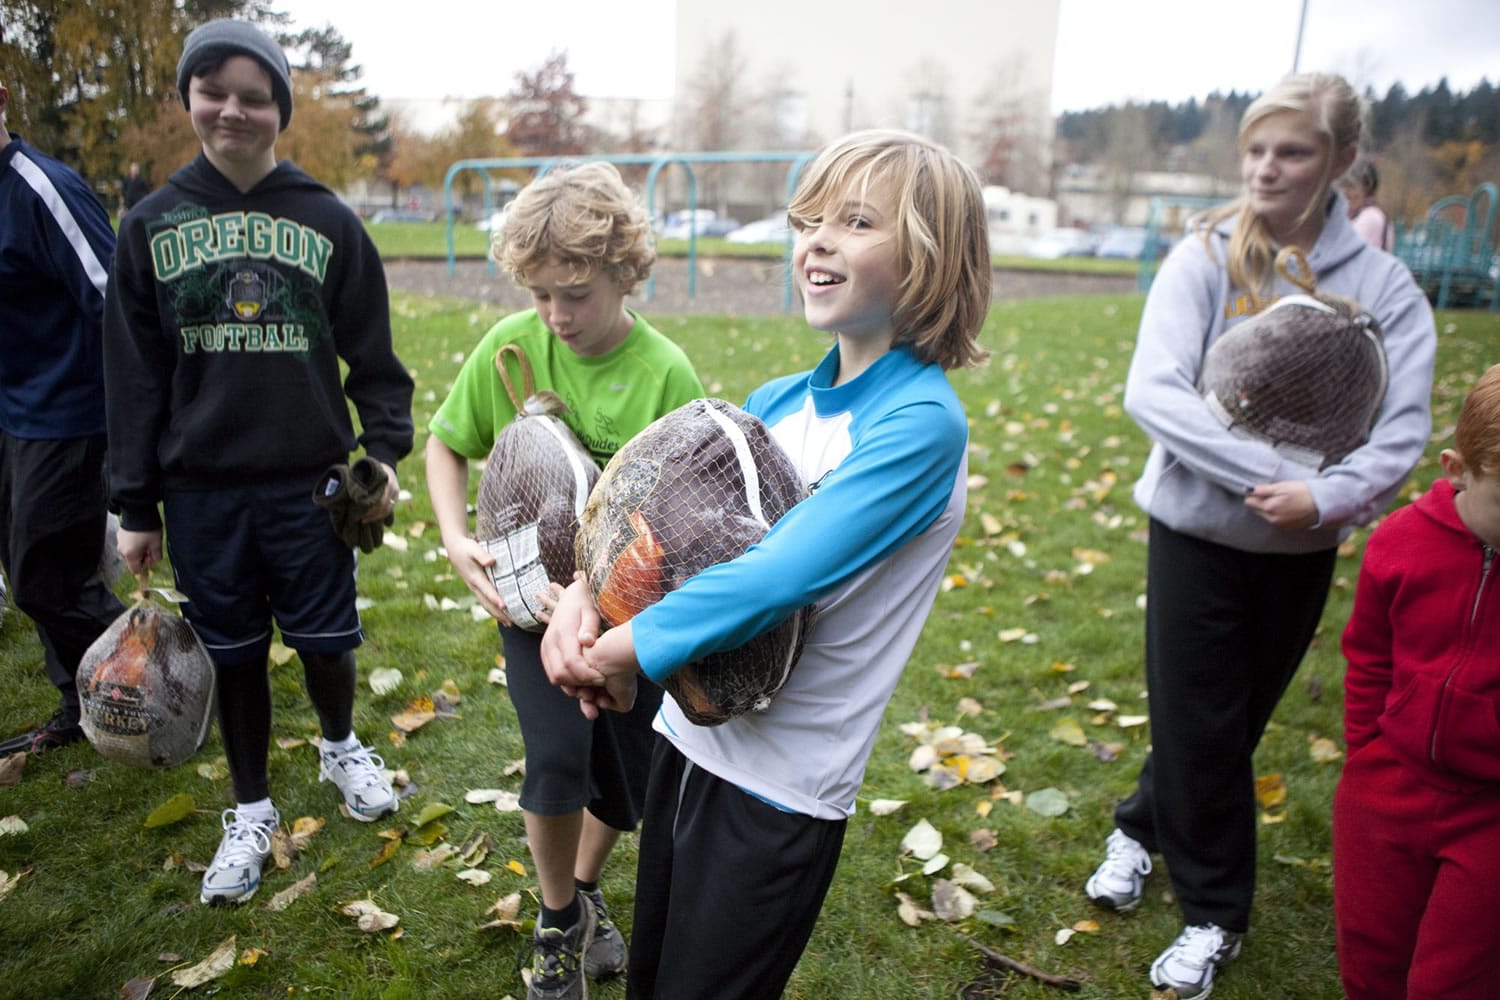 Whiley Middlemas, 9, center, and Oliver Clauson, 9, in green, were among the 20 runners who won a frozen turkey during a raffle at the Clark County Running Club's annual Turkey Trot at Marine Park on Saturday.